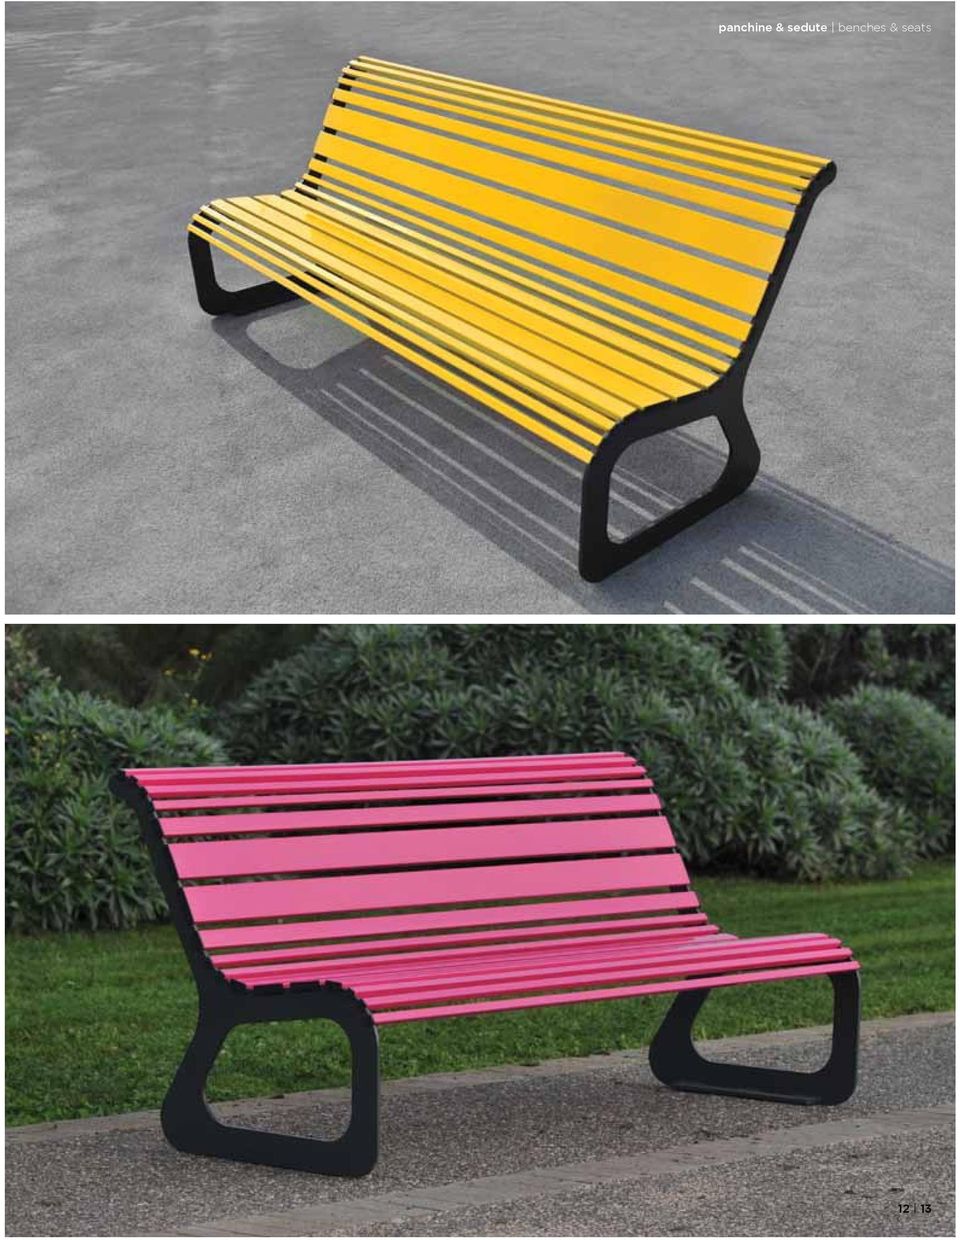 benches &